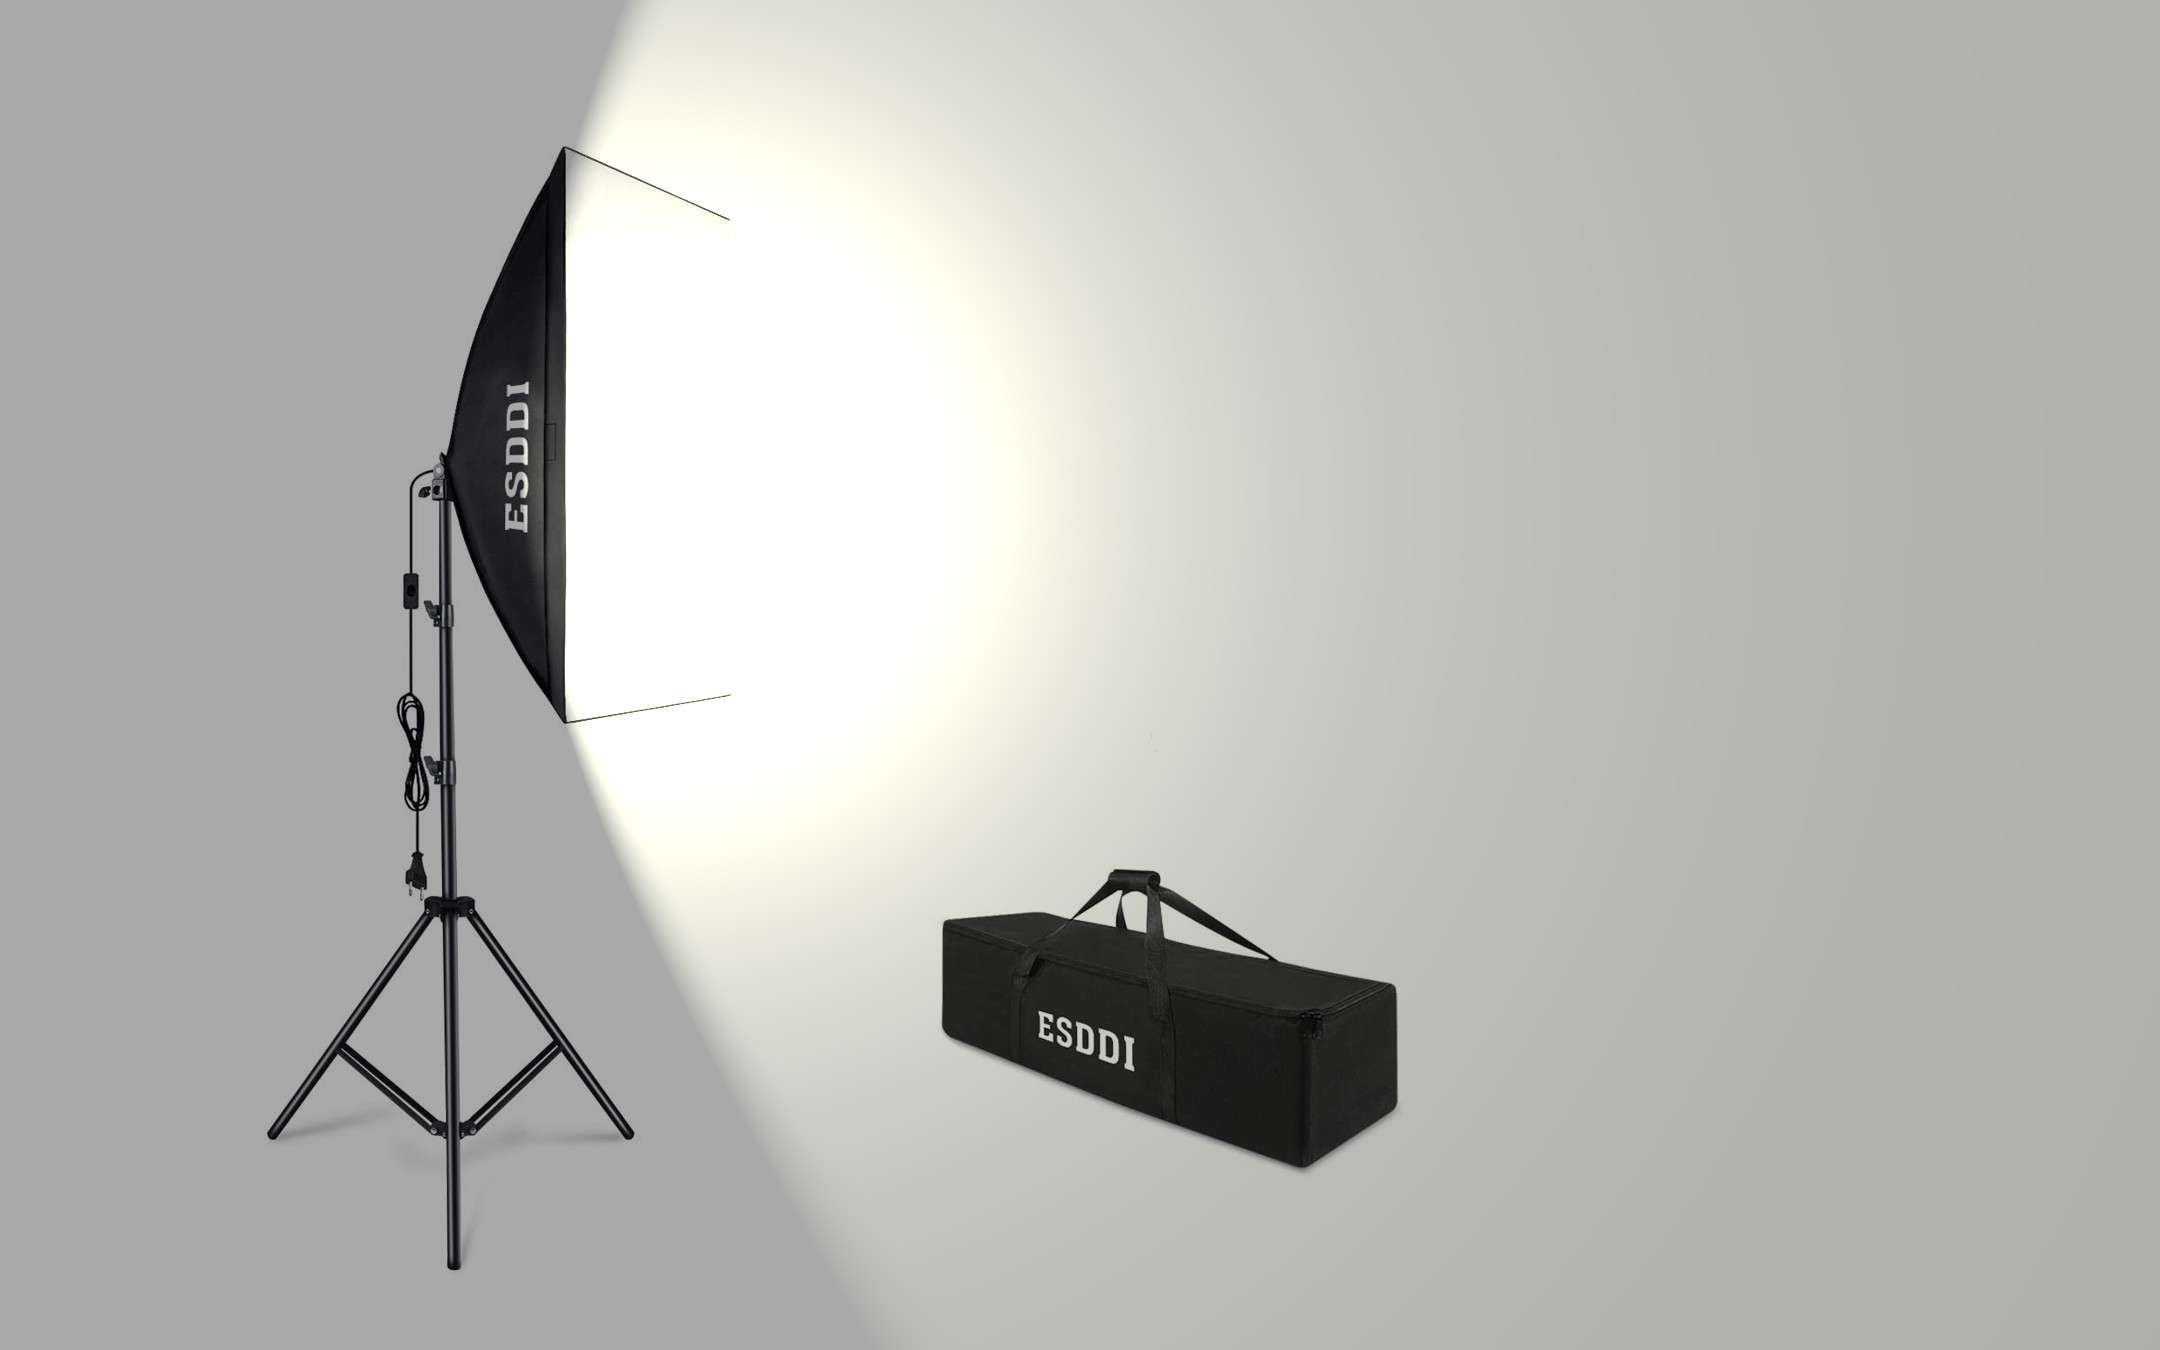 Everything in the right light: softboxes, here's the discount